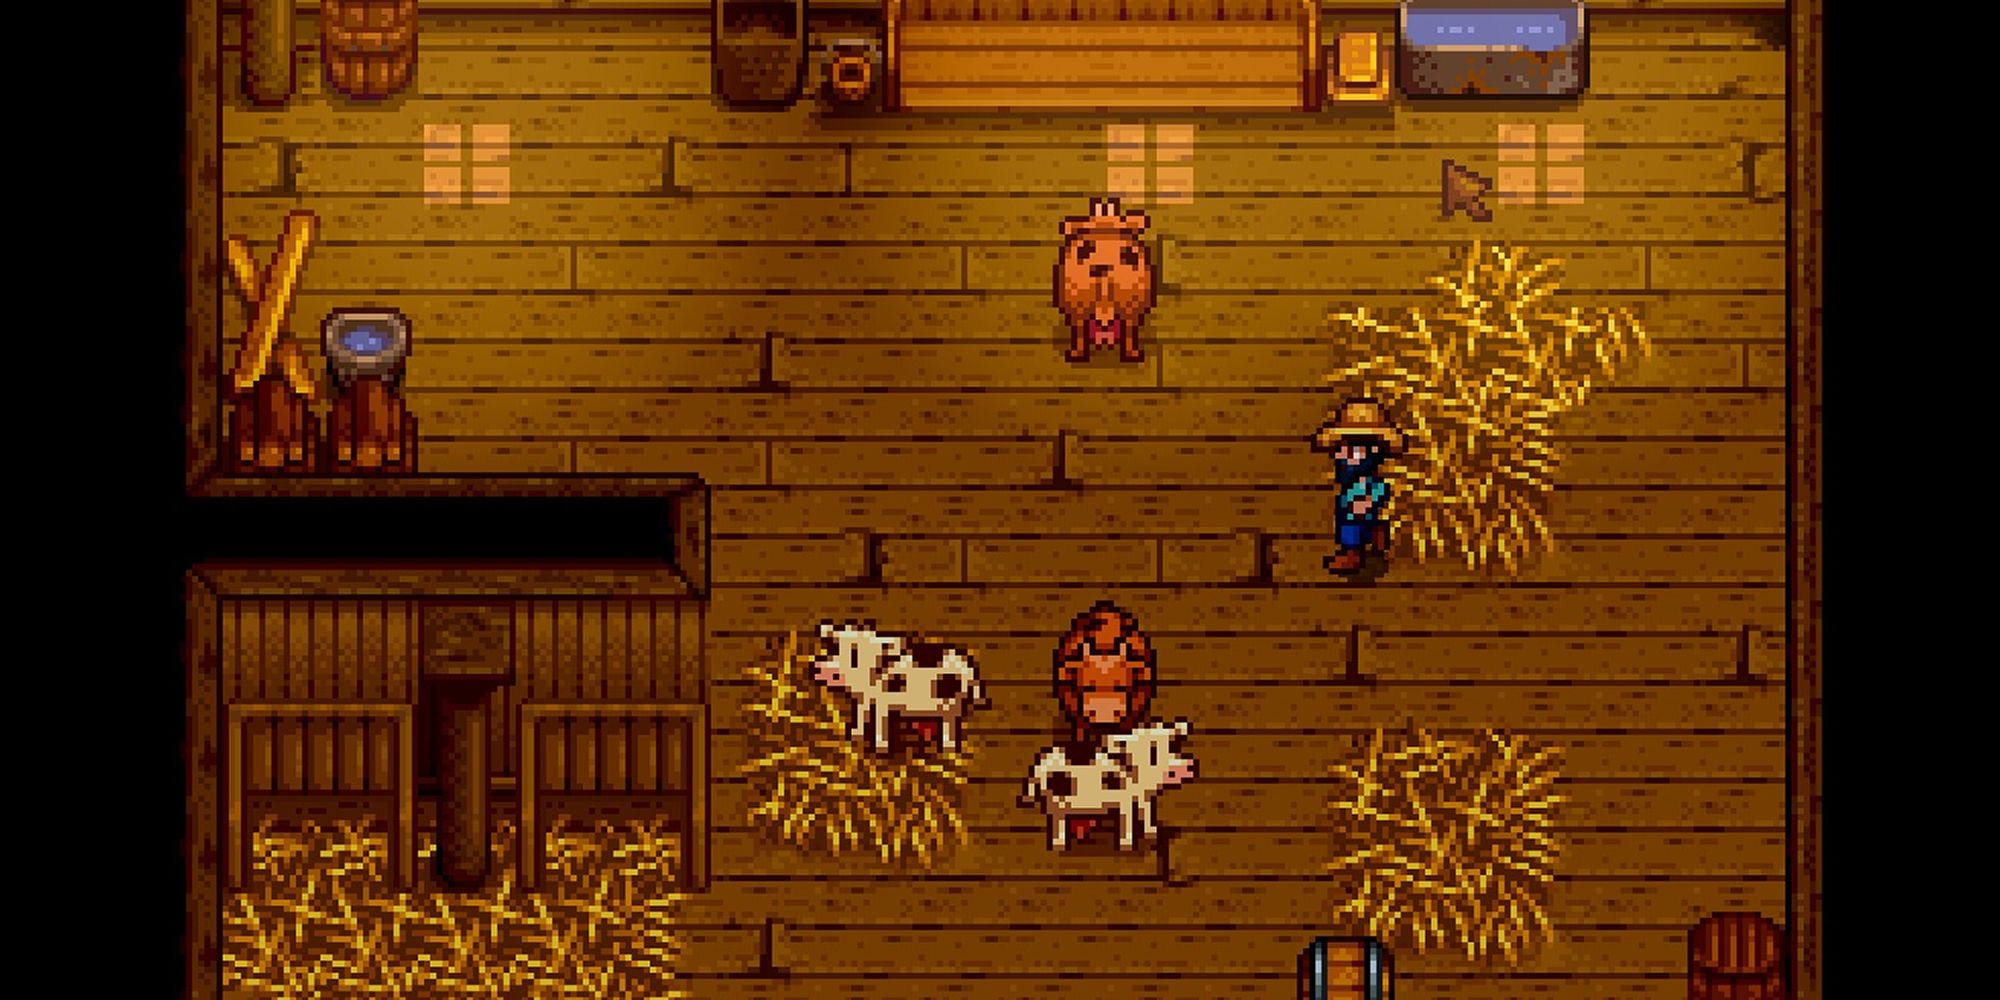 Stardew Valley In The Barn With The Cows